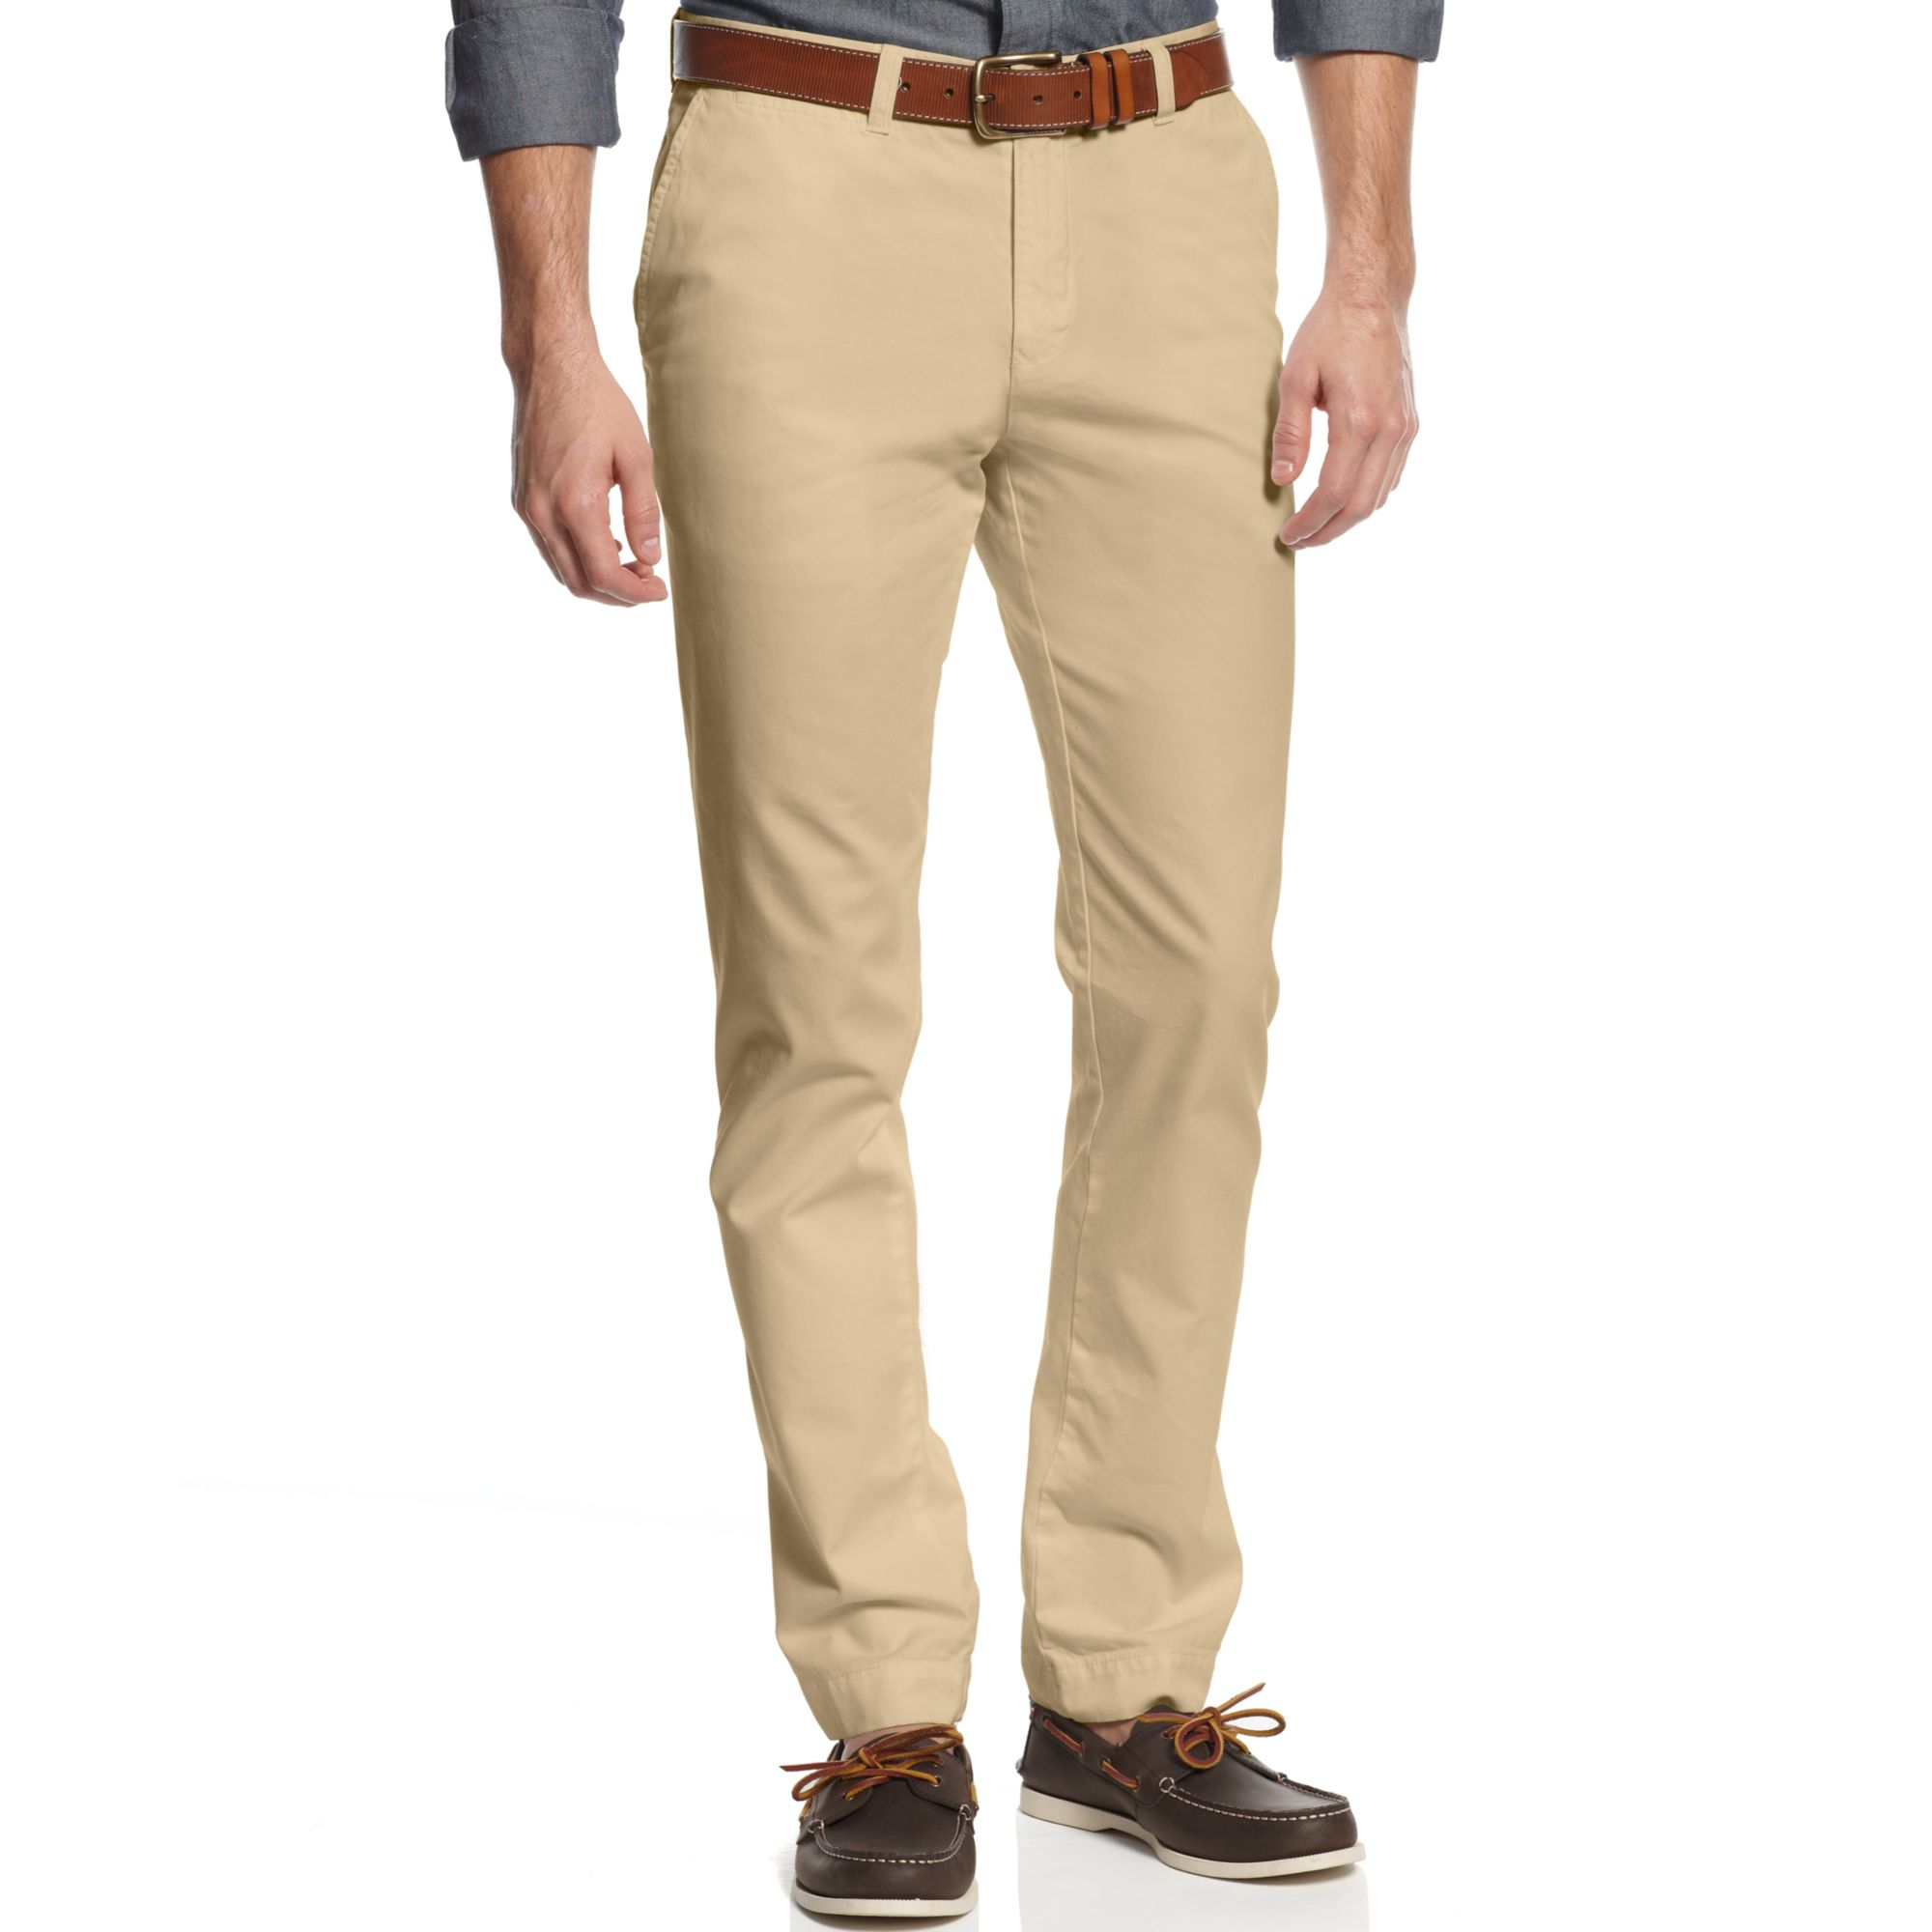 Lyst - Tommy Hilfiger Graduate Slimfit Chino Pants in Natural for Men